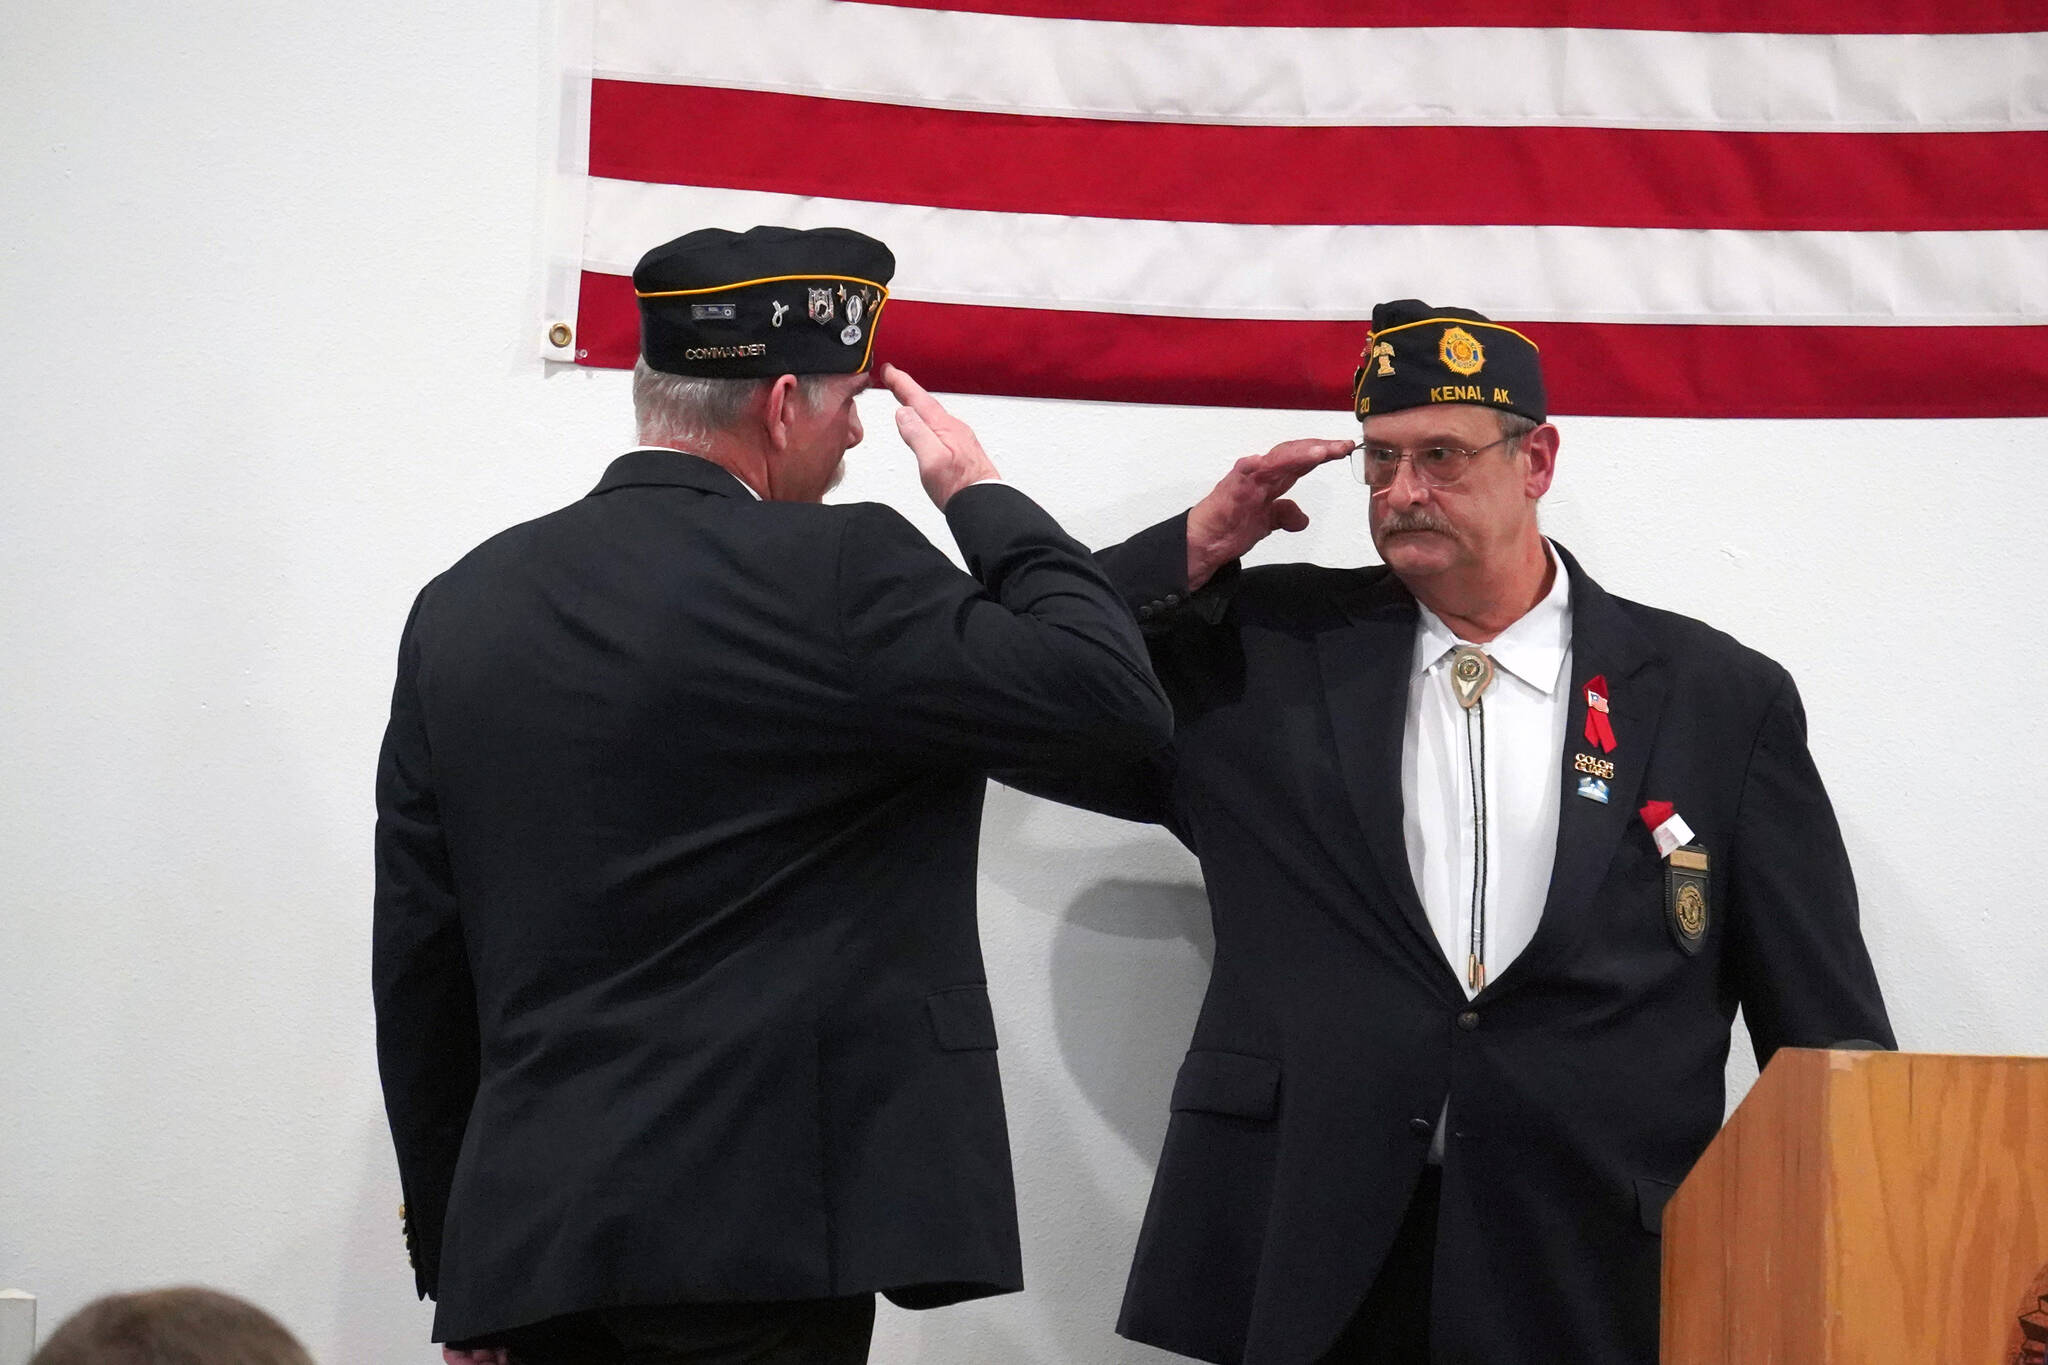 American Legion Post 20 Cmdr. Ron Homan shares a salute with Past Cmdr. Dave Segura before speaking during a Veterans Day celebration at the American Legion Post 20 in Kenai, Alaska, on Saturday, Nov. 11, 2023. (Jake Dye/Peninsula Clarion)